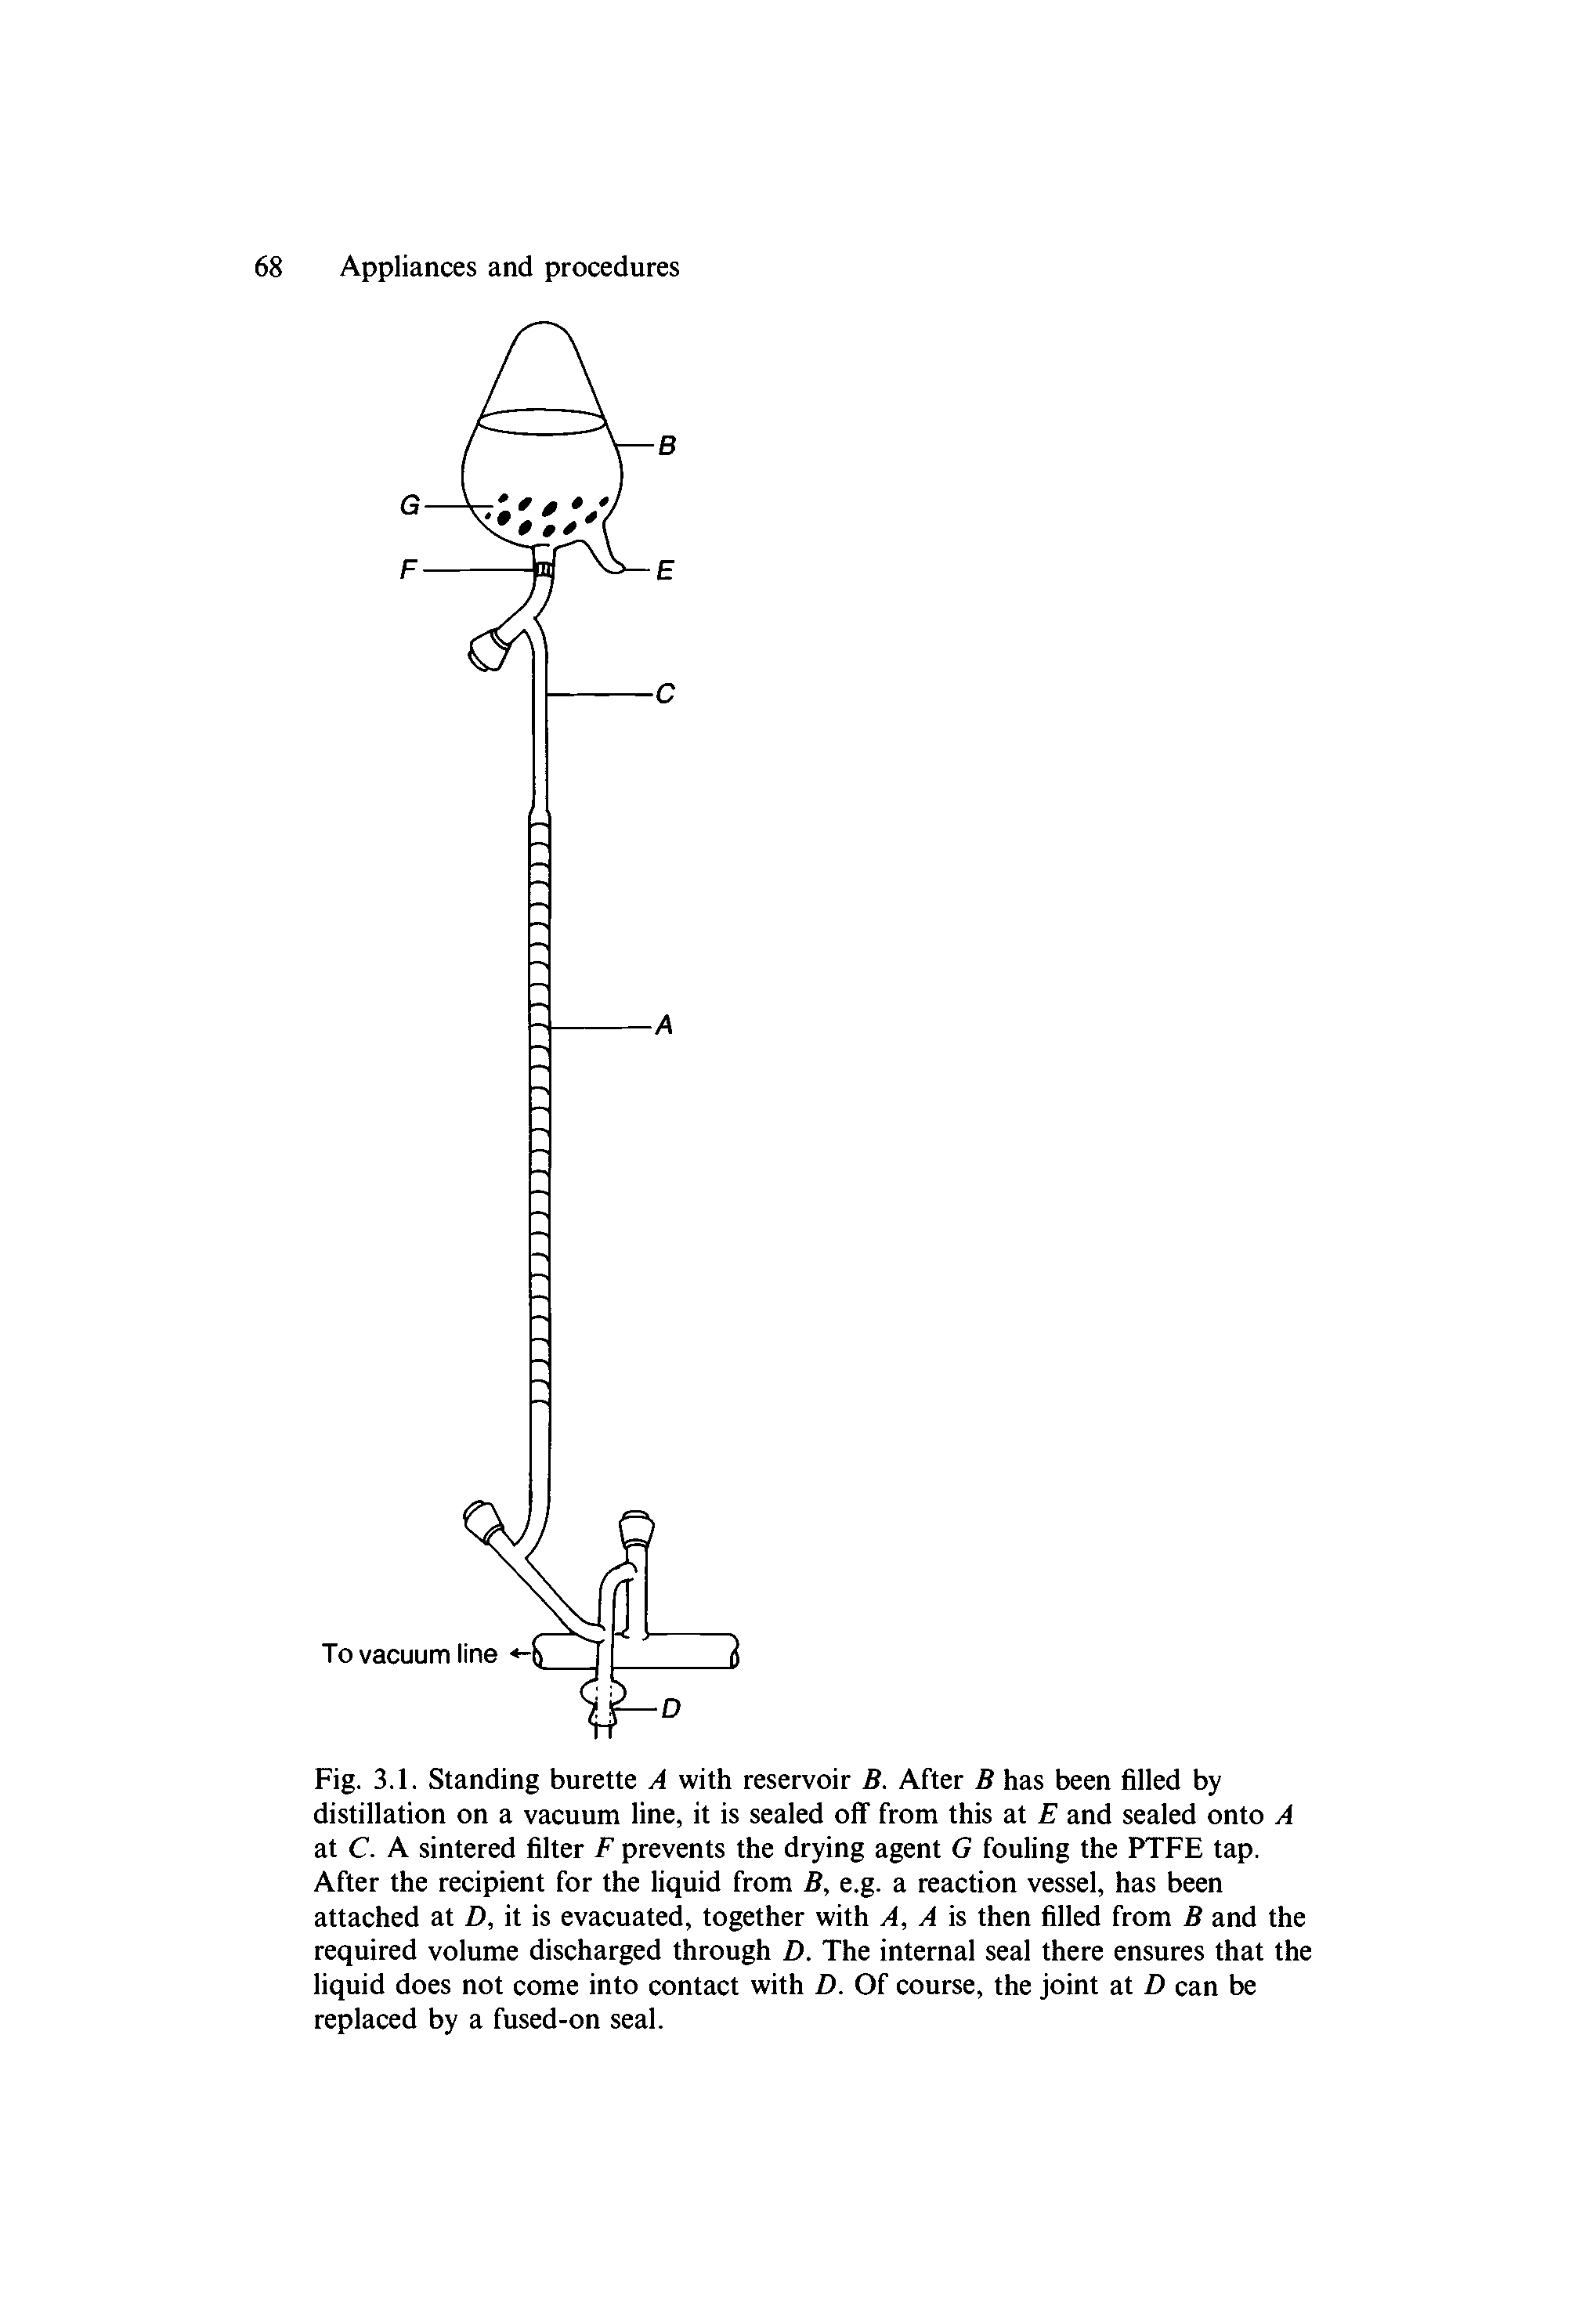 Fig. 3.1. Standing burette A with reservoir B. After B has been filled by distillation on a vacuum line, it is sealed off from this at E and sealed onto A at C. A sintered filter F prevents the drying agent G fouling the PTFE tap. After the recipient for the liquid from B, e.g. a reaction vessel, has been attached at D, it is evacuated, together with A, A is then filled from B and the required volume discharged through D. The internal seal there ensures that the liquid does not come into contact with D. Of course, the joint at D can be replaced by a fused-on seal.